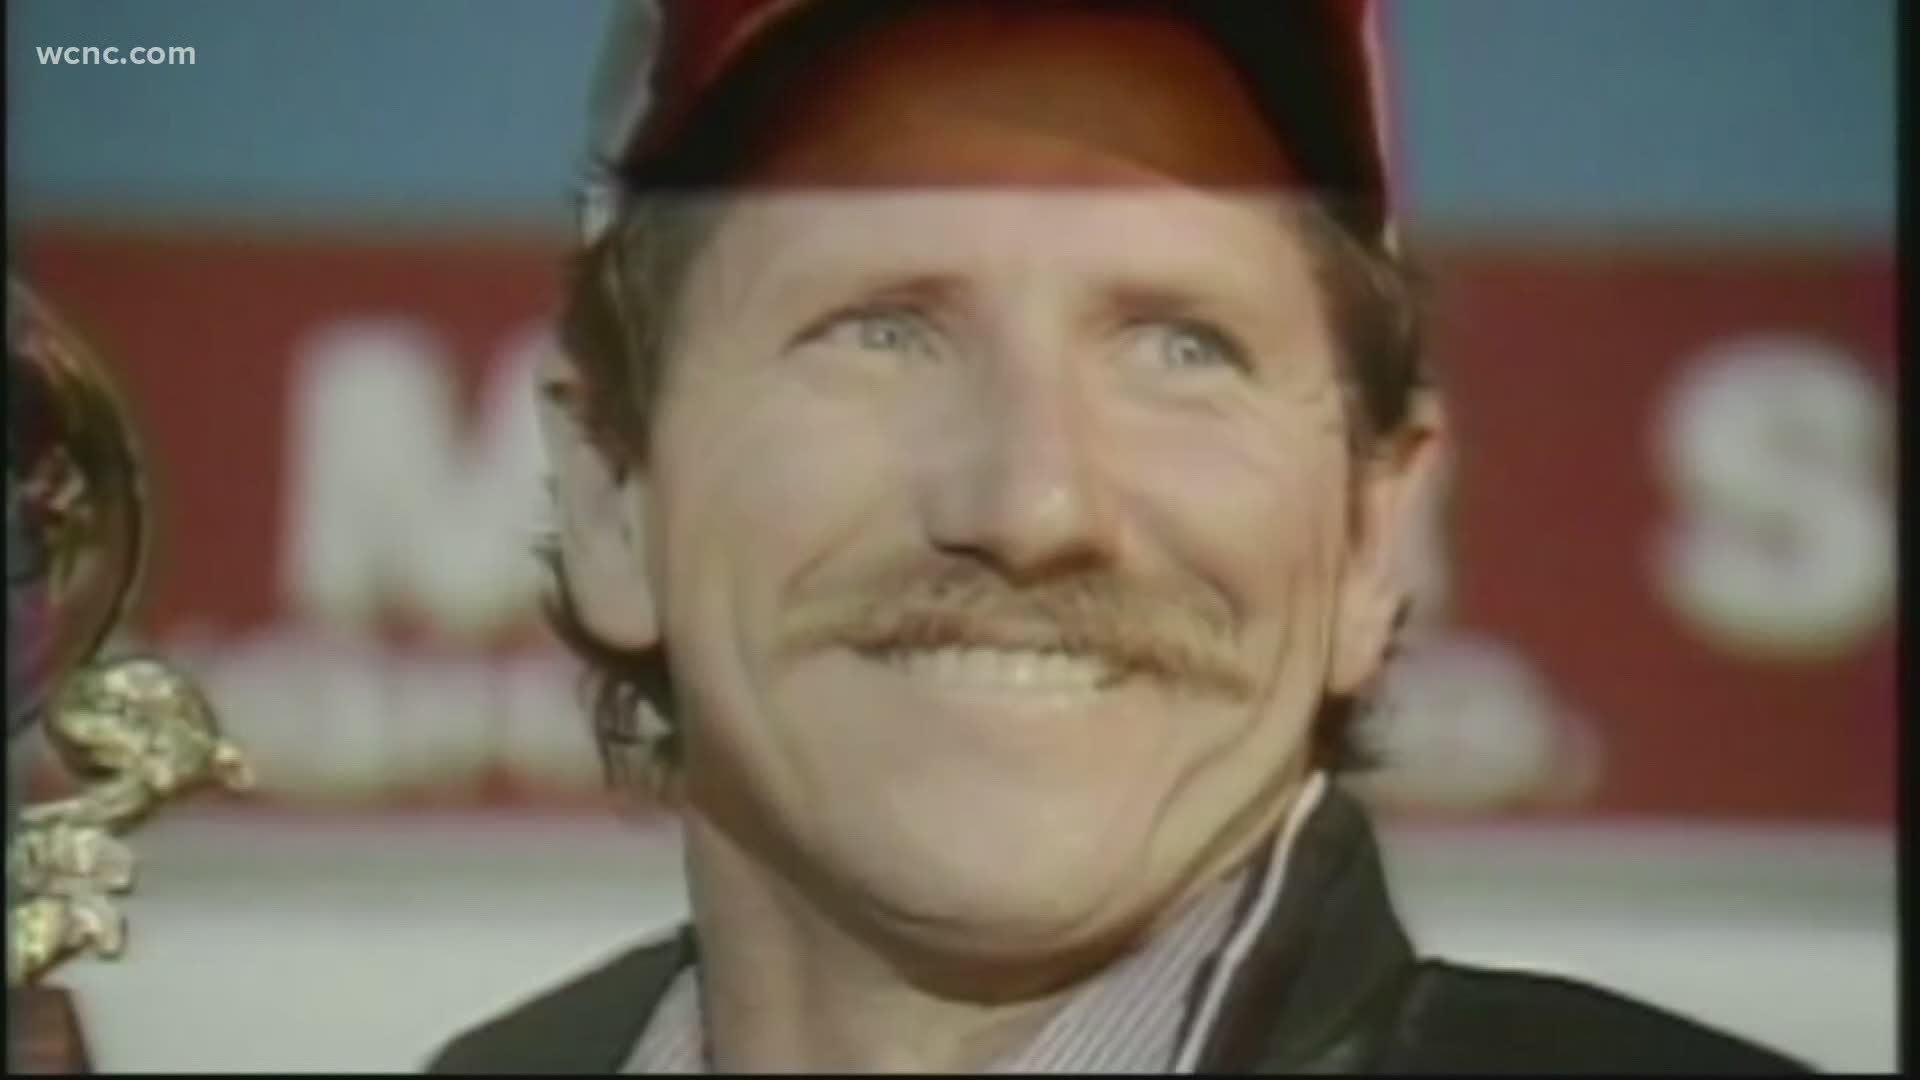 Seven-time champion Dale Earnhardt was killed during the Daytona 500 in the final turn 20 years ago. He was the fourth national series driver killed in nine months.